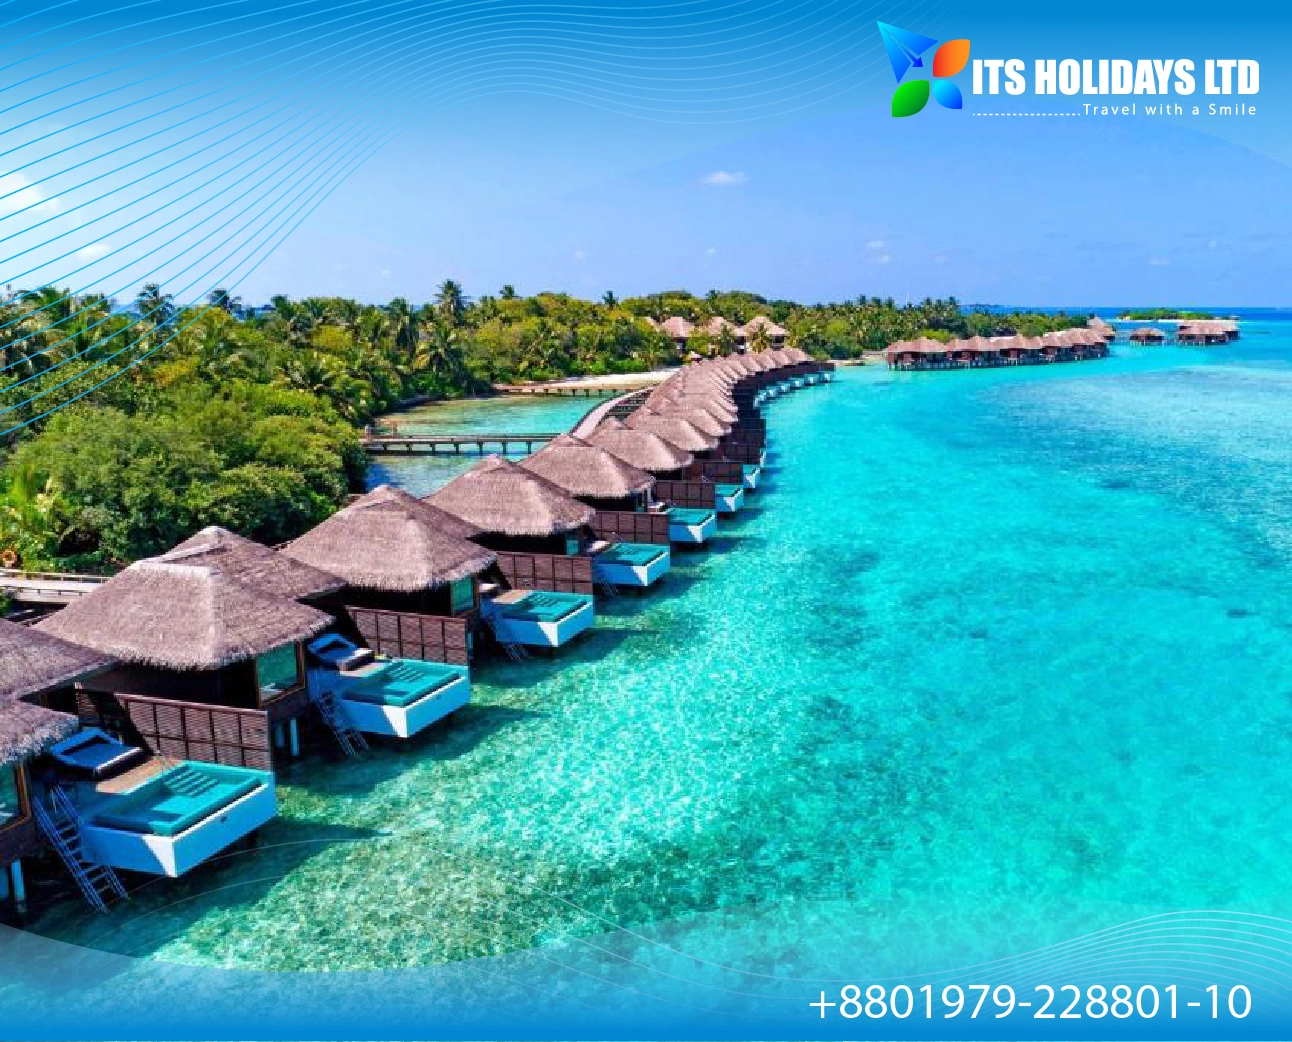 Eid Exclusive Package Tour at Maafushi Island In Maldives -5